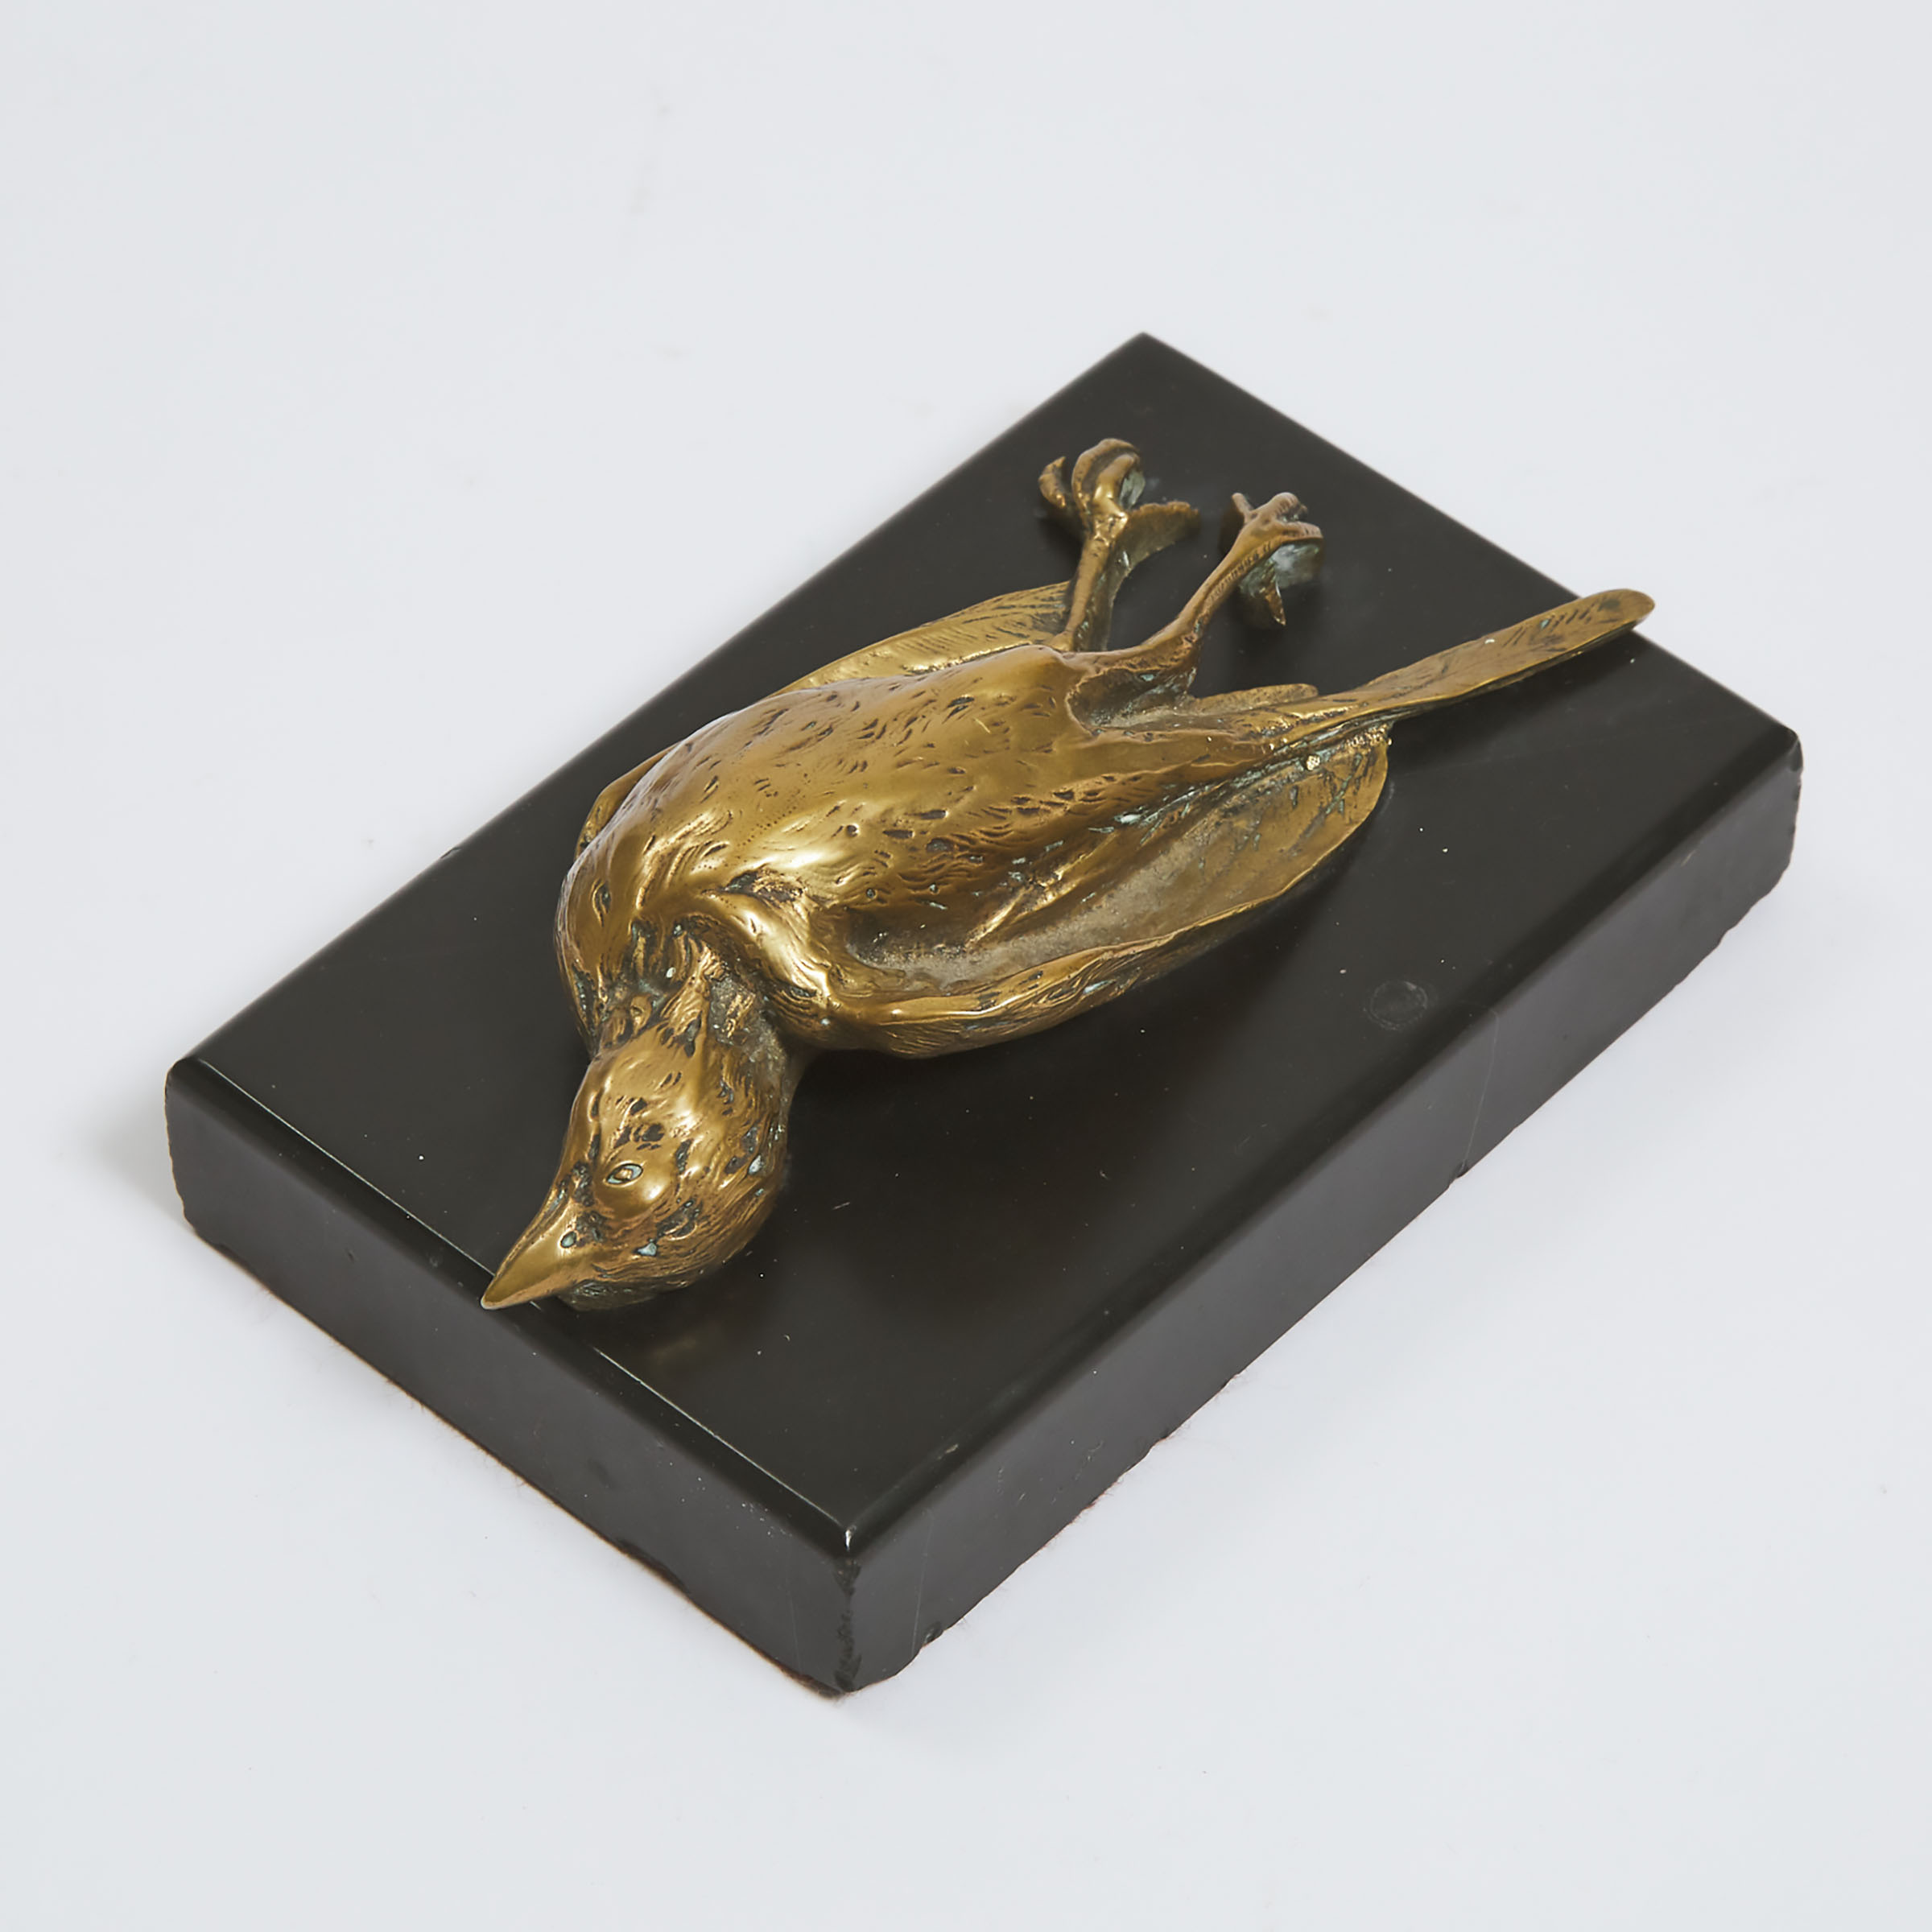 Victorian Gilt Bronze Paperweight in the Form of a Dead English Sparrow, mid 19th century